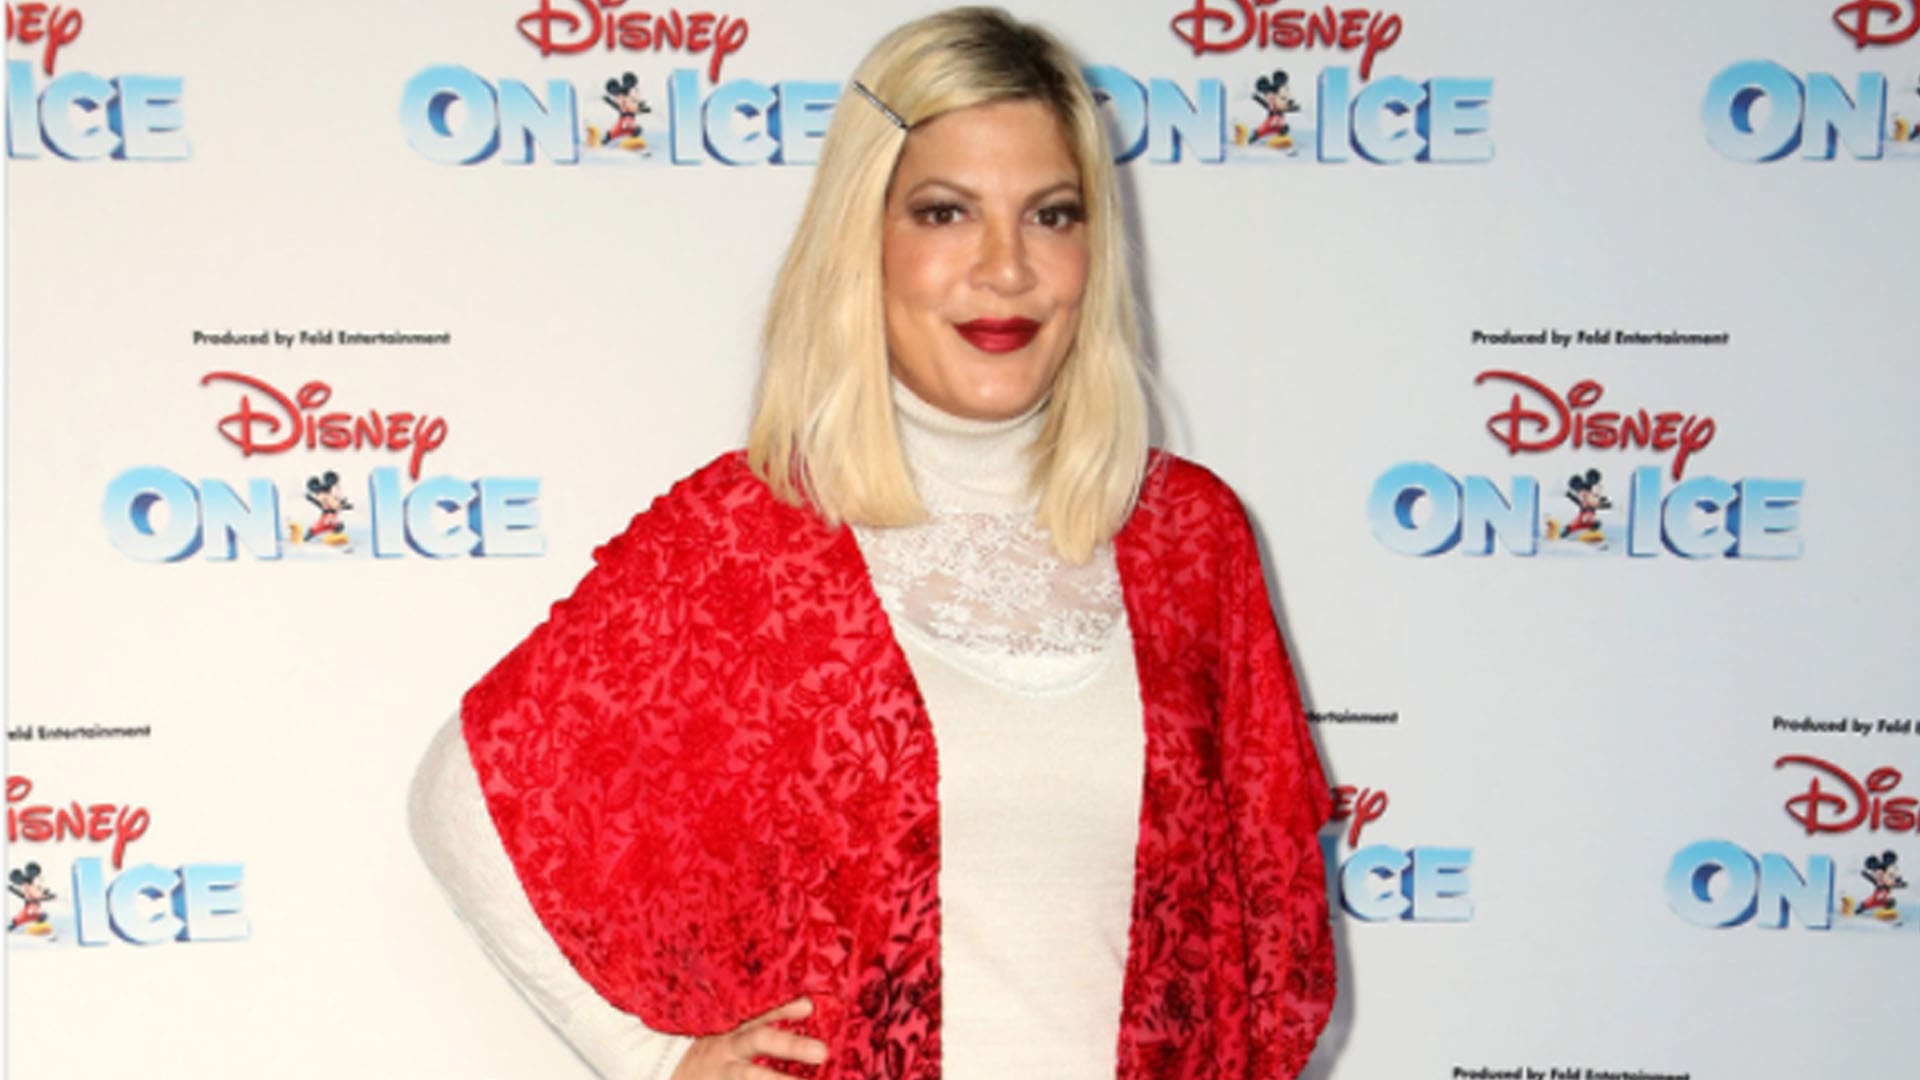 Tori Spelling Once Accidentally Dyed Her Pubic Hair Purple: “I Left The Toner On For Too Long”